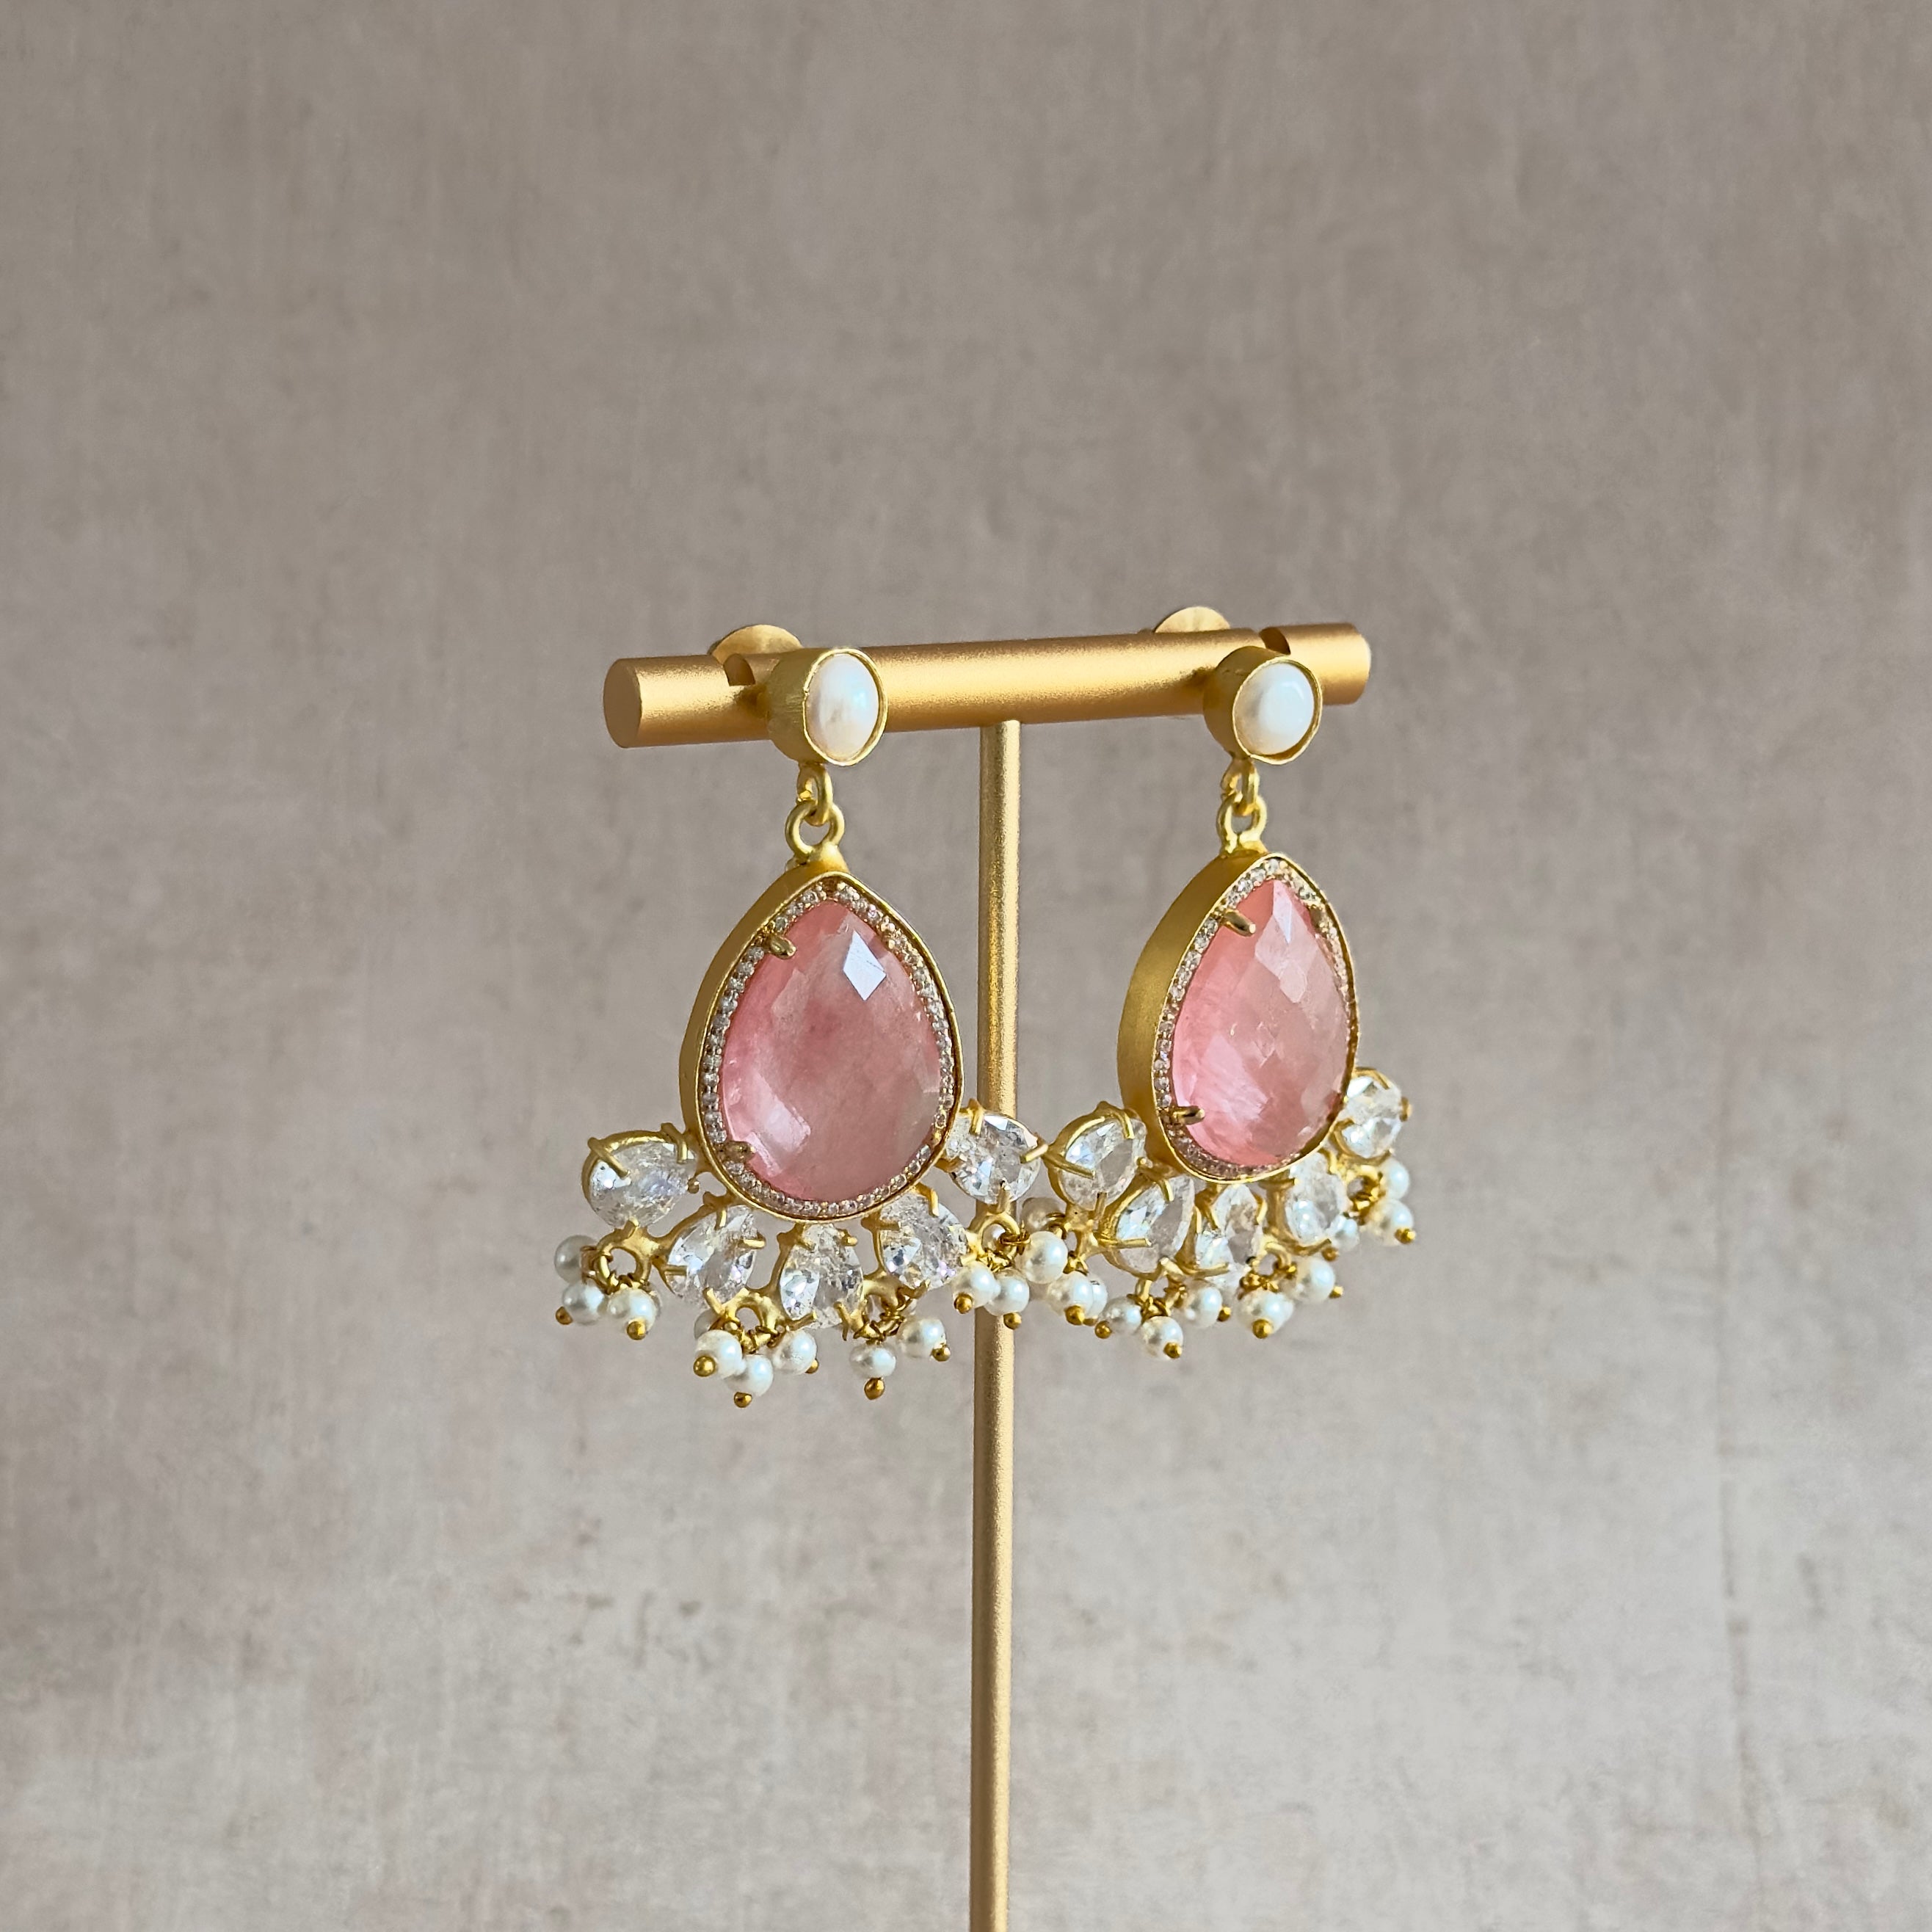 Enhance your style with our Molly Crystal Drop Earrings! Featuring a stunning crimson crystal with delicate pearl accents and sparkling cubic zirconia, these earrings will add a touch of elegance and glamour to any outfit. Elevate your look and shine bright with these eye-catching earrings.